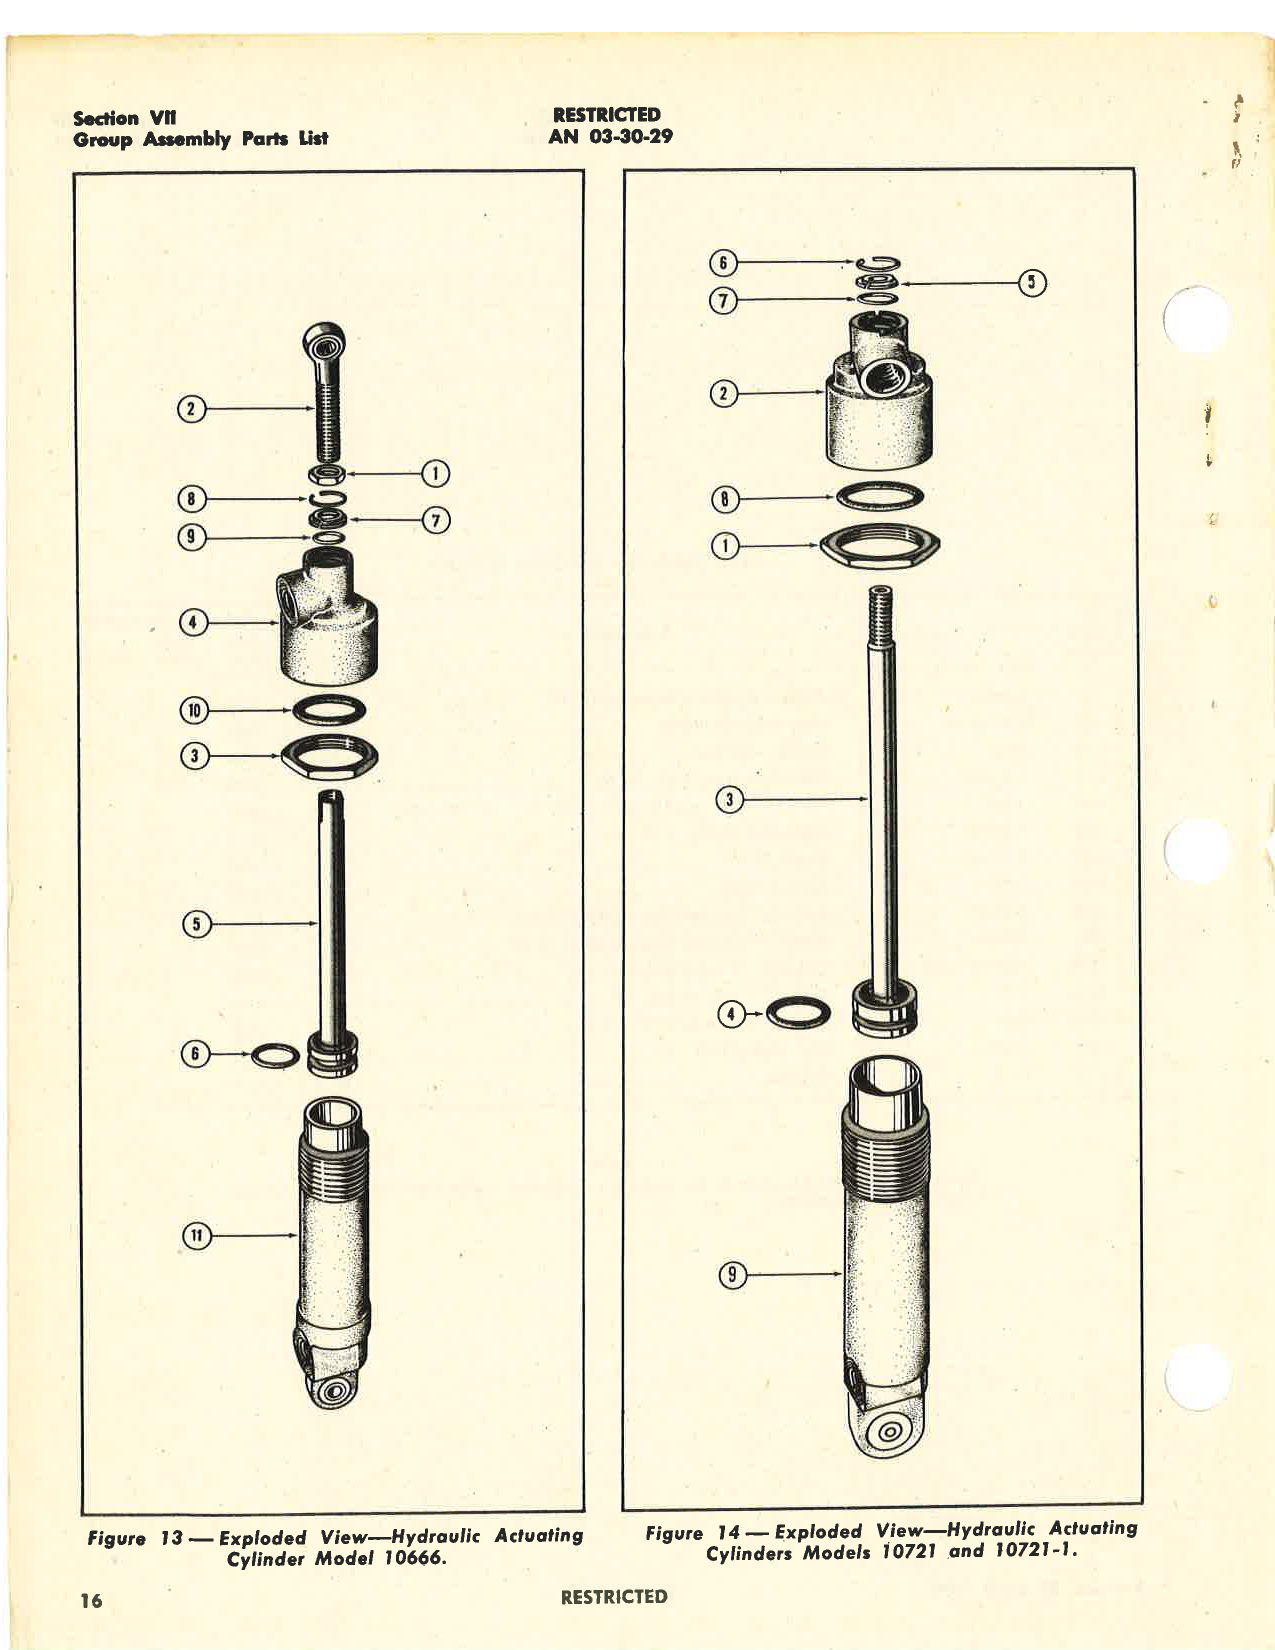 Sample page 6 from AirCorps Library document: Handbook of Instructions with Parts Catalog, Hydraulic Actuating Cylinders